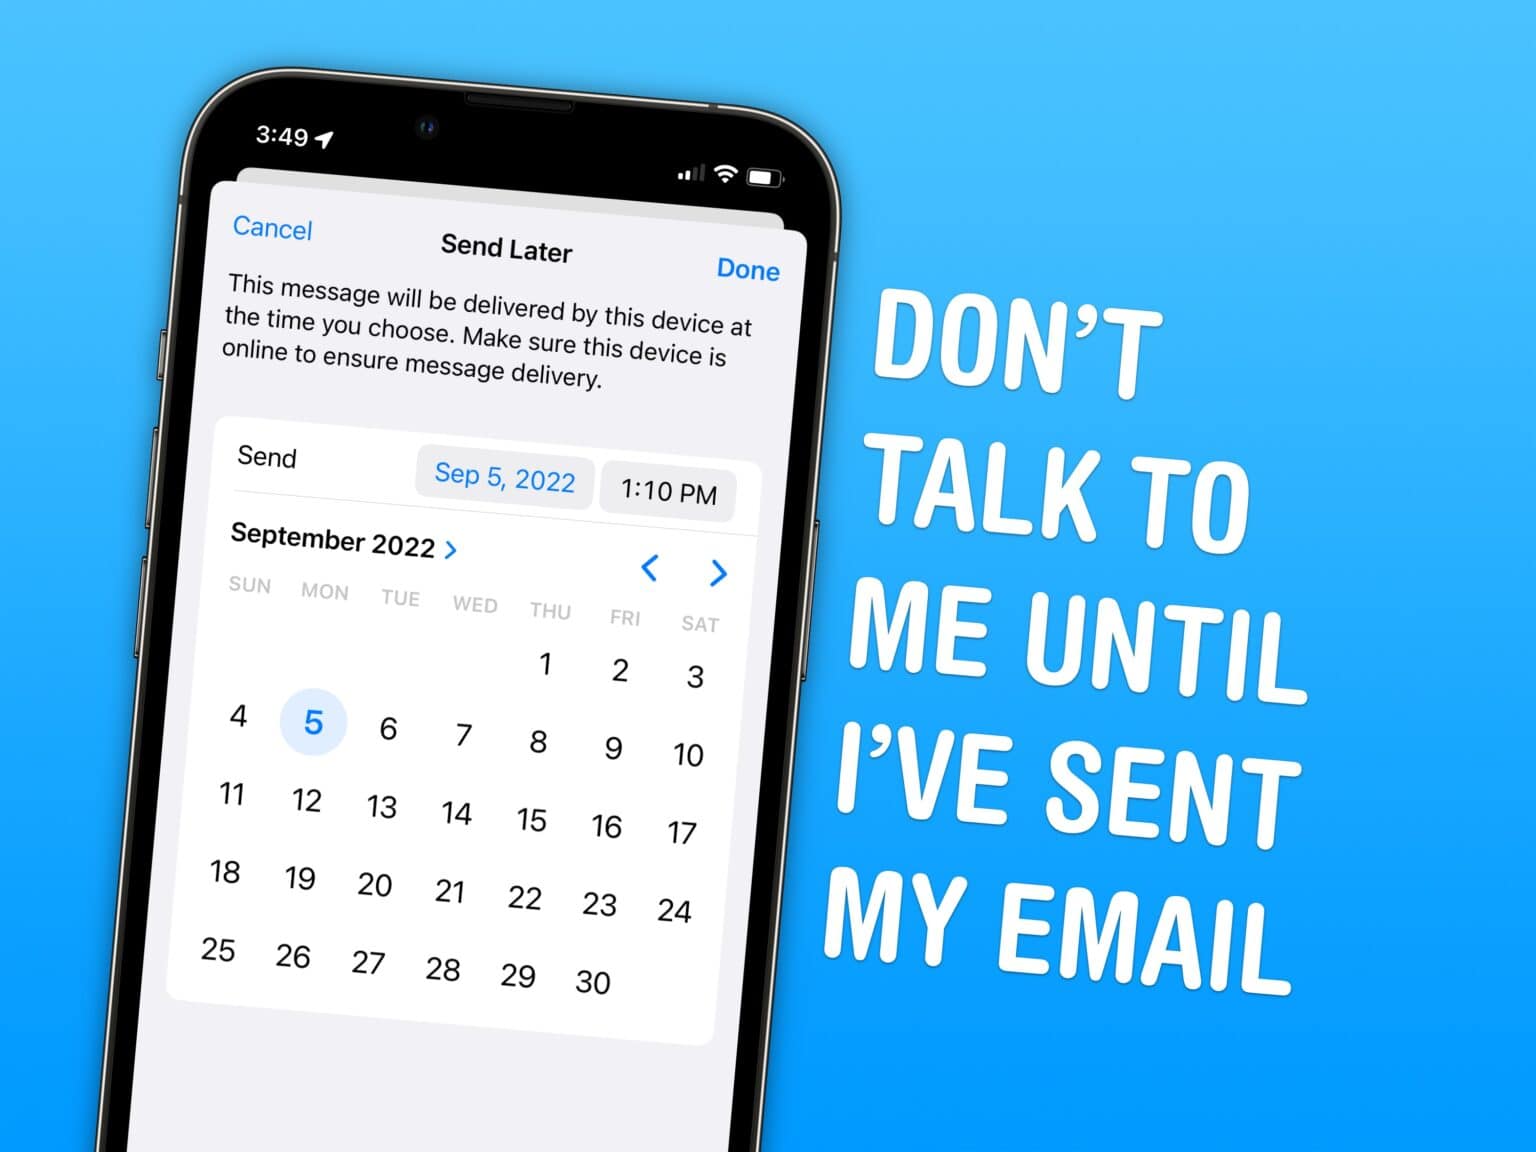 Undo sending emails and schedule emails in advance.